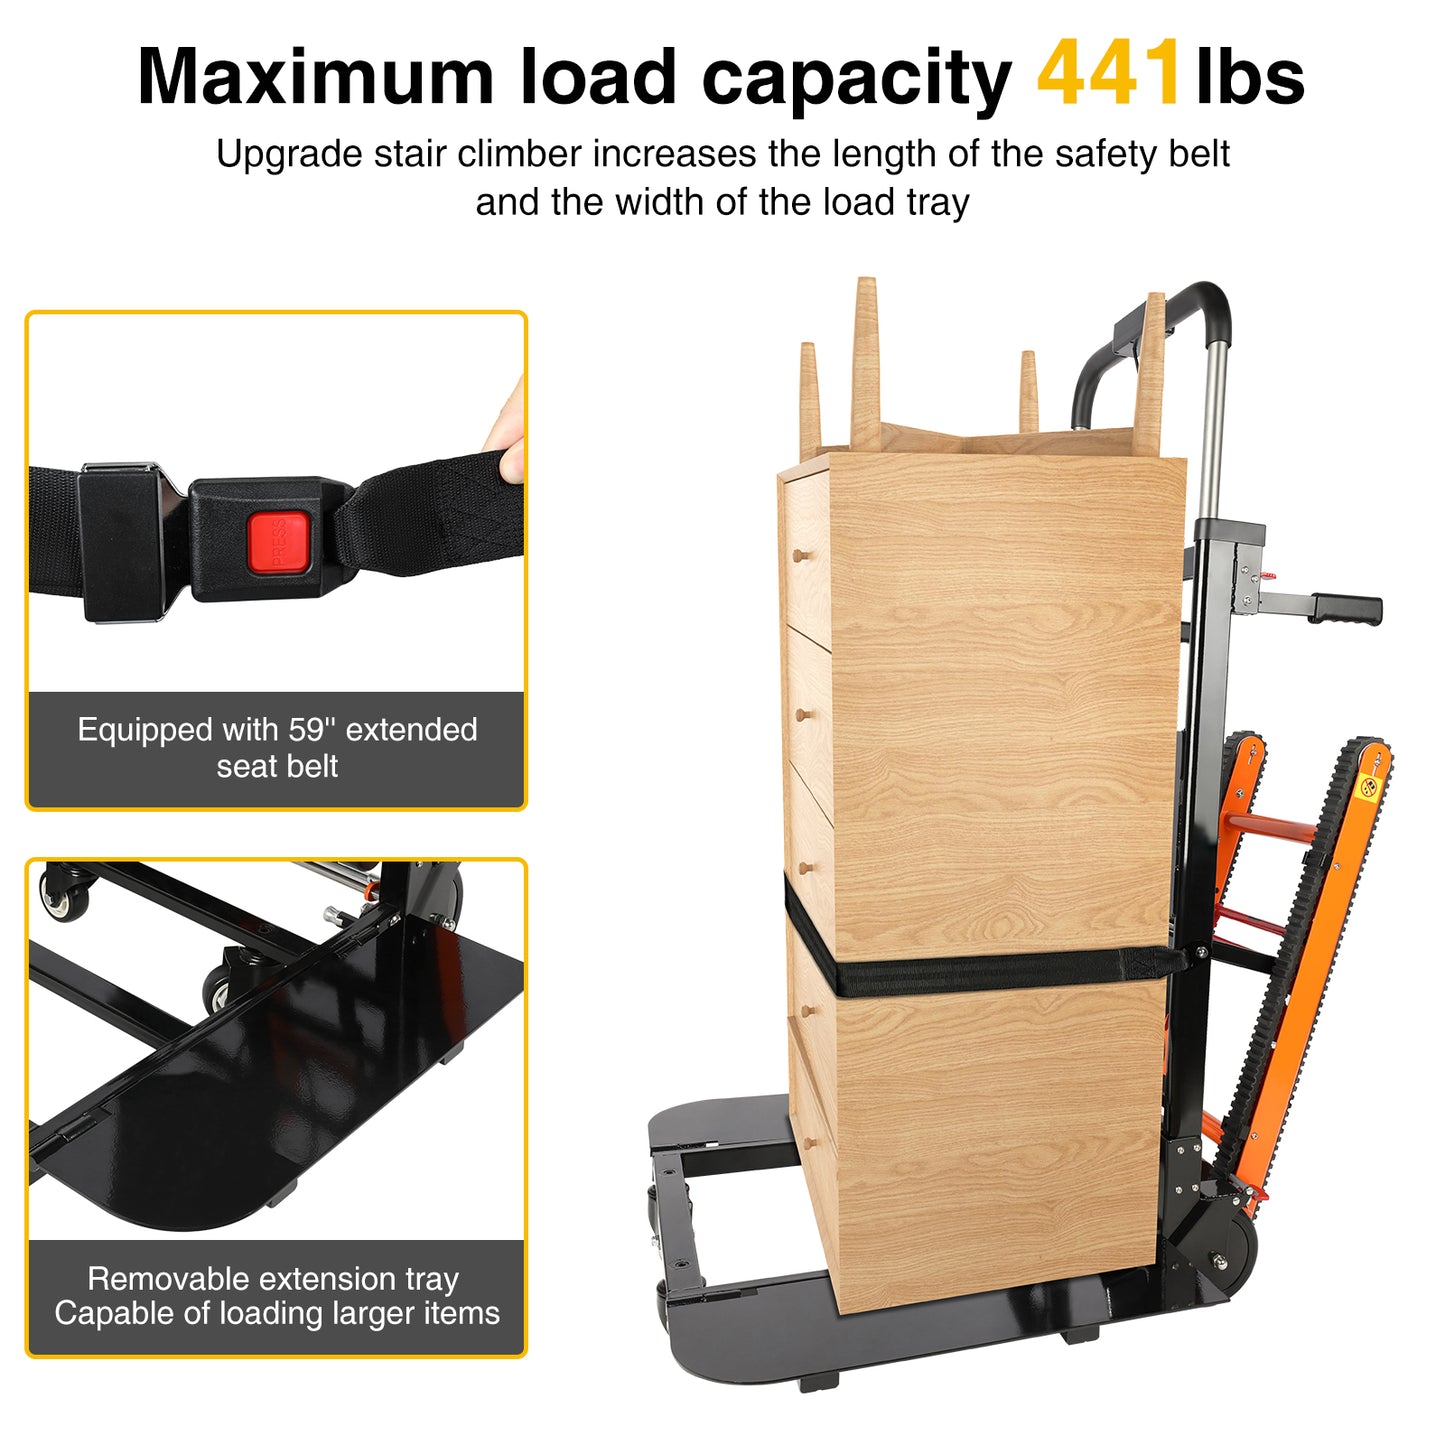 Electric Stair Climbing Hand Trucks, Dolly Cart 440lbs Max Load 120W Power Heavy Duty Folding Stair Climber Moving Cart with Motor Battery for Family Warehouse Logistics